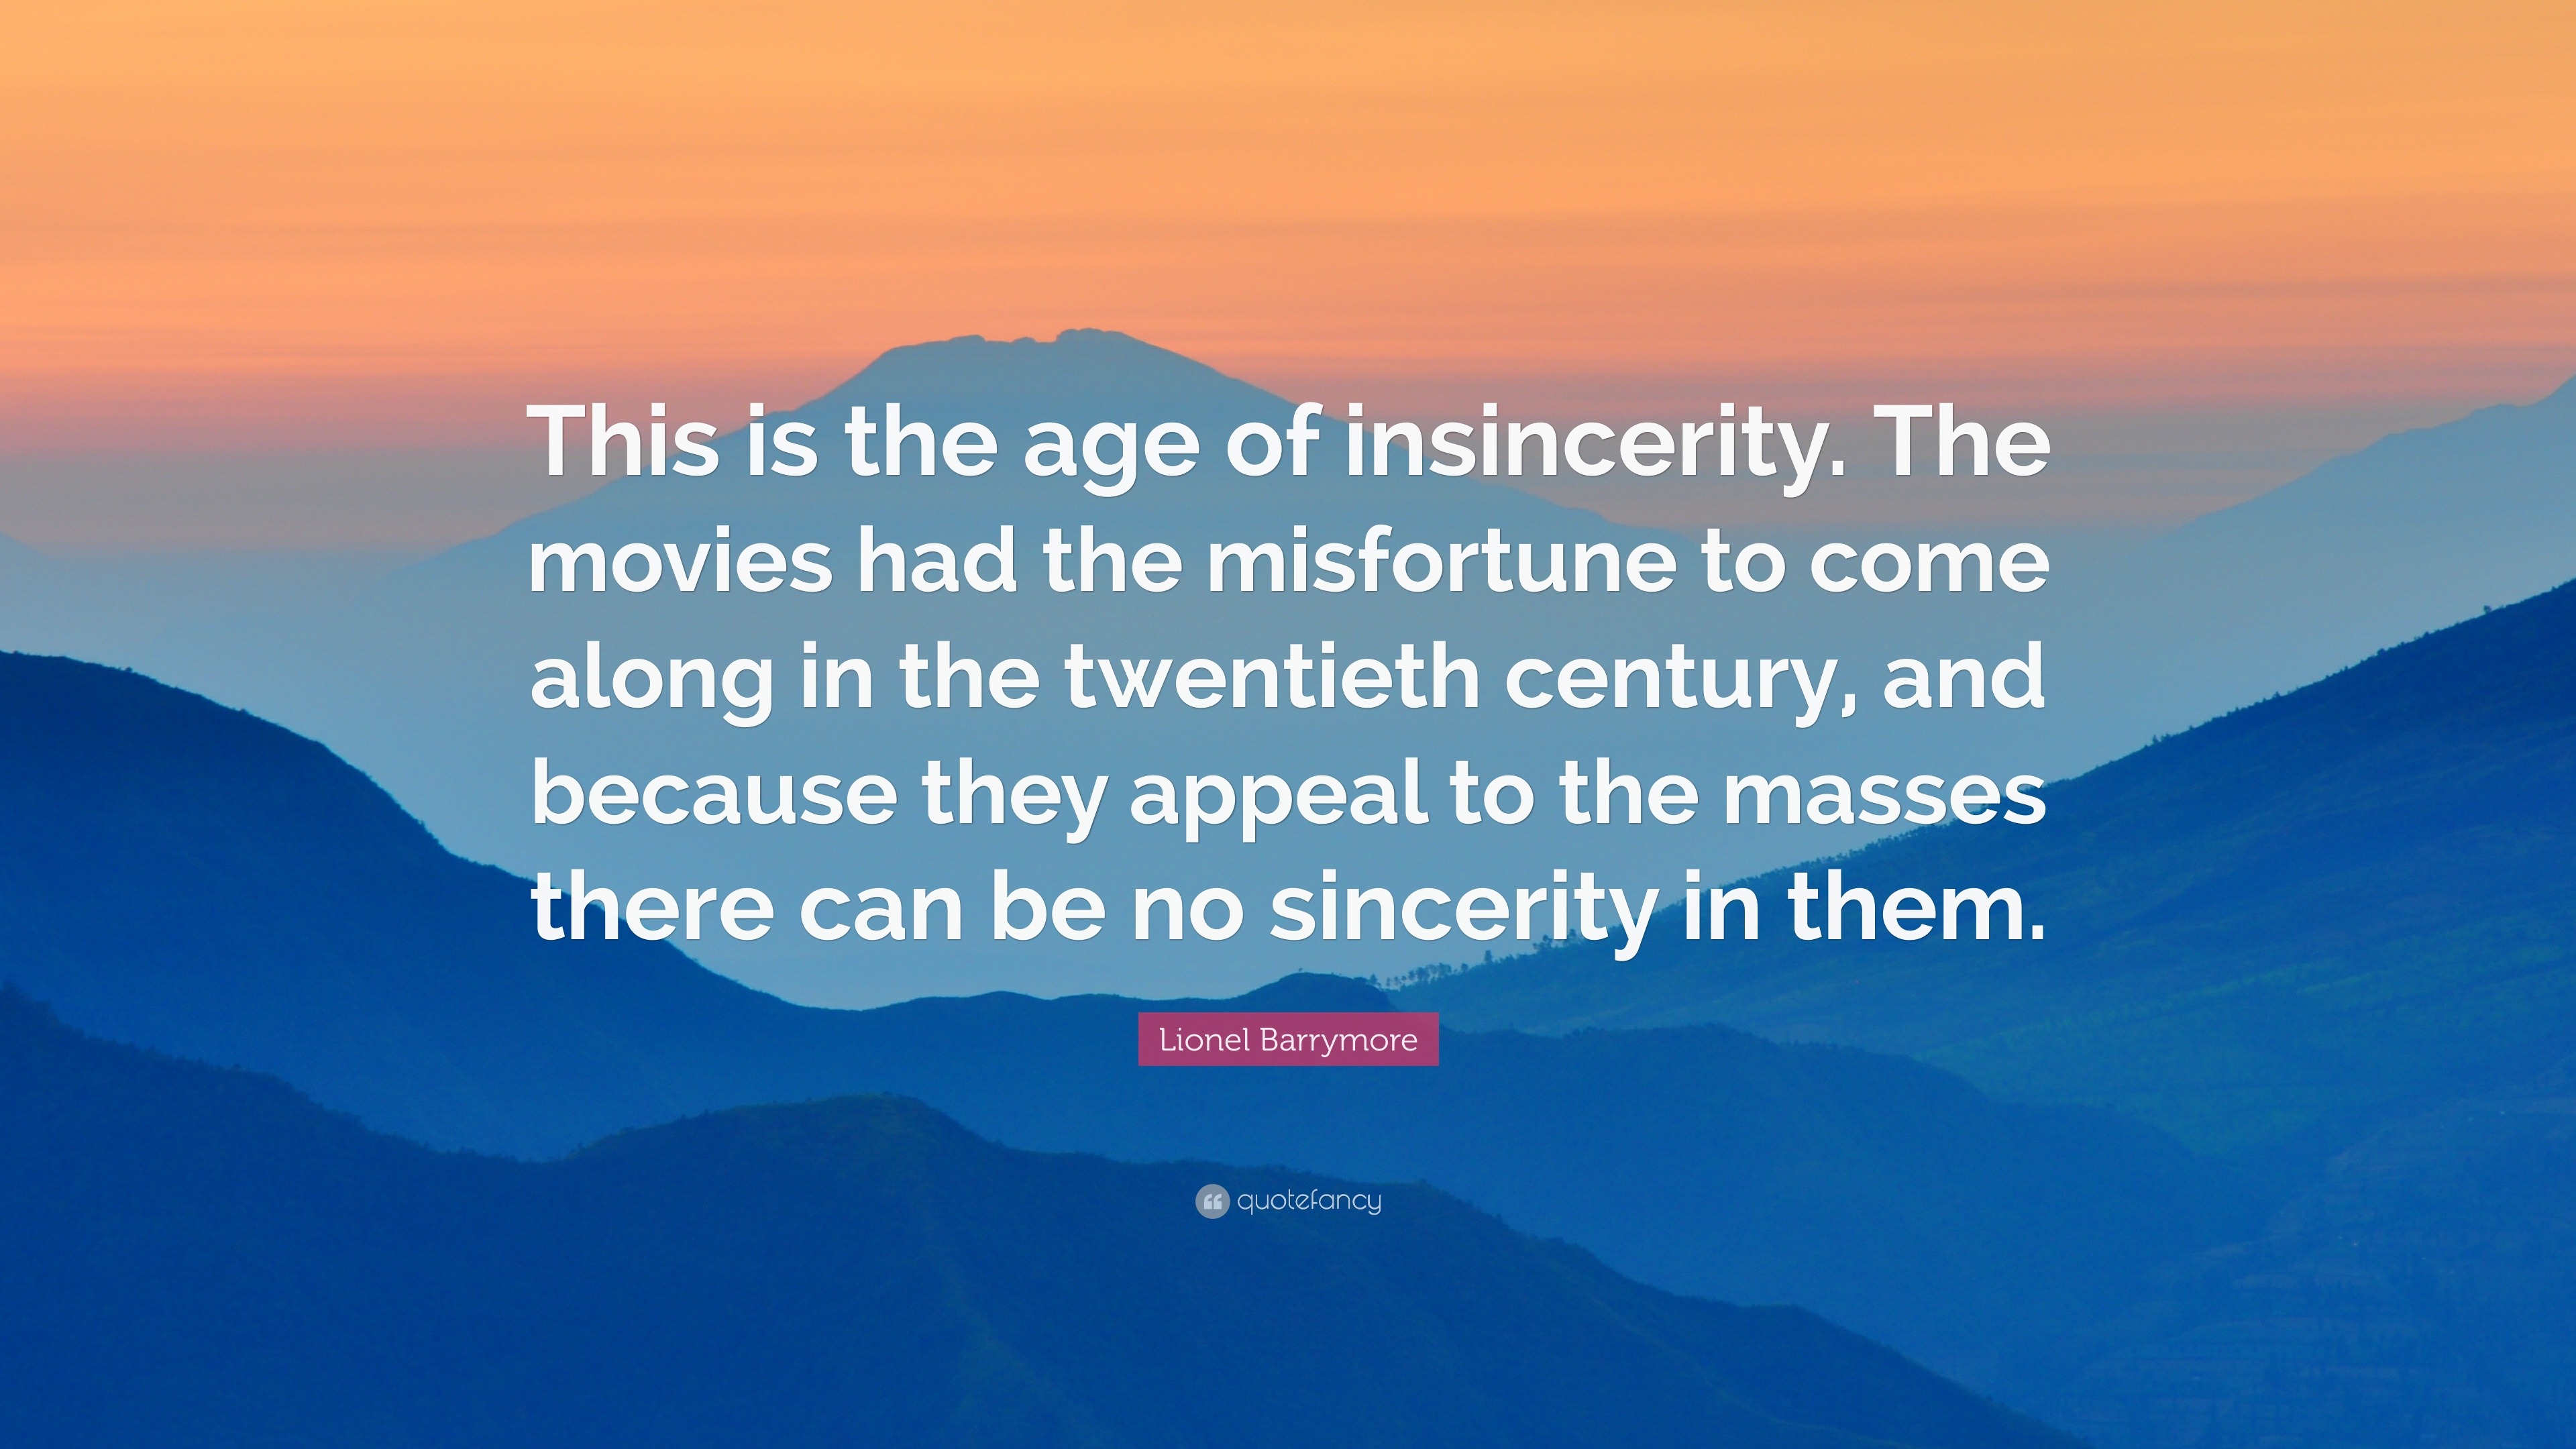 movie quotes about aging